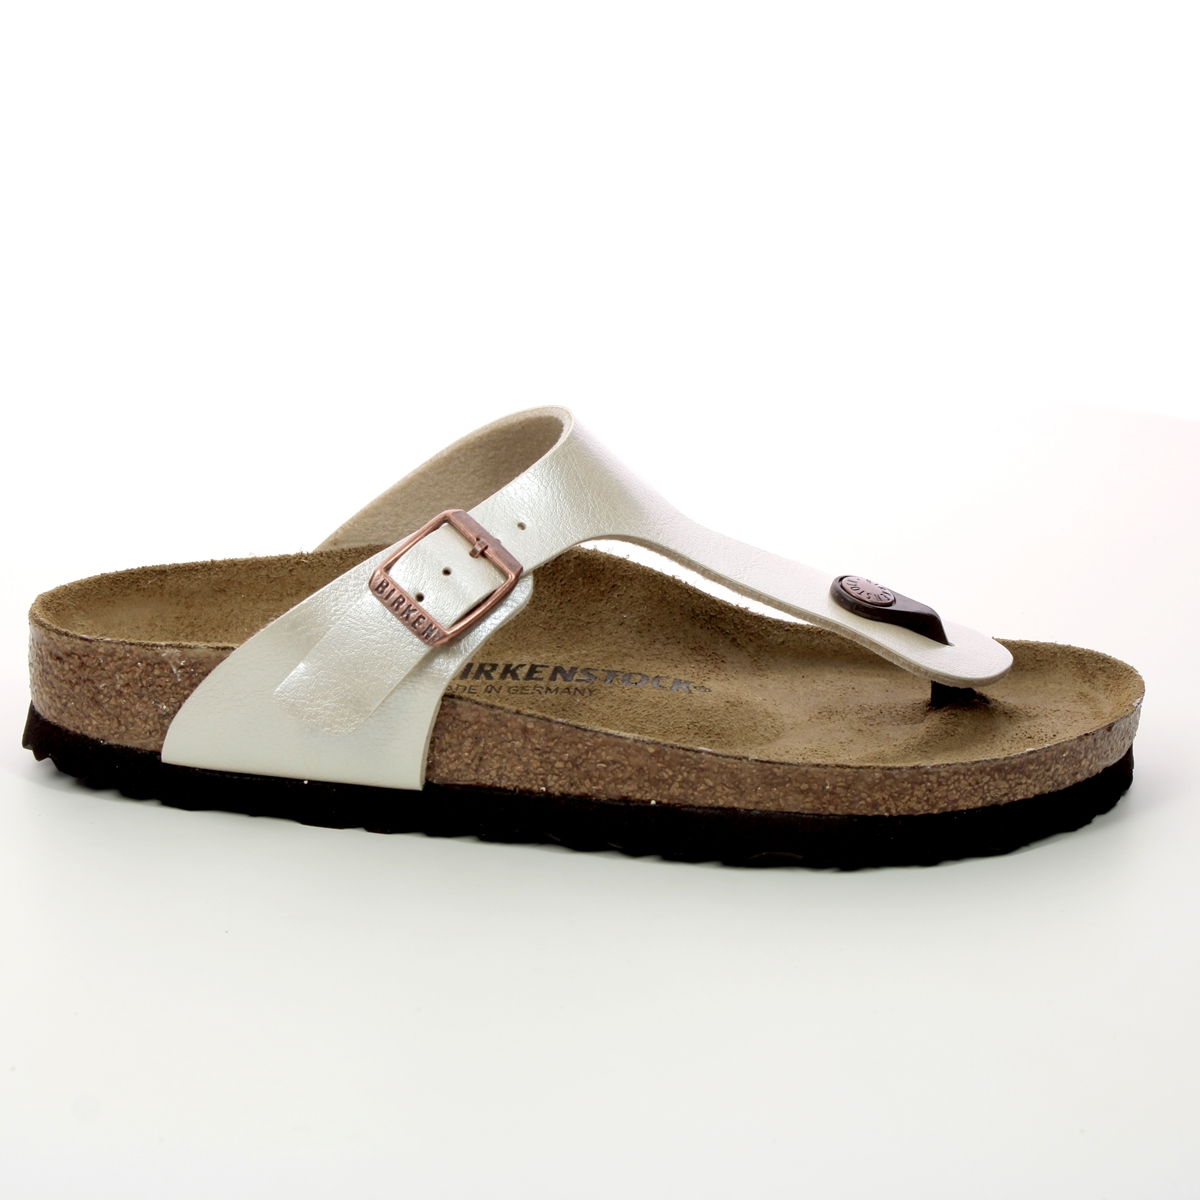 https://www.beggshoes.com/images/products/verylarge/birkenstock-gizeh-narrow-943873-oyster-toe-post-sandals-1680620184-051387352-02.jpg